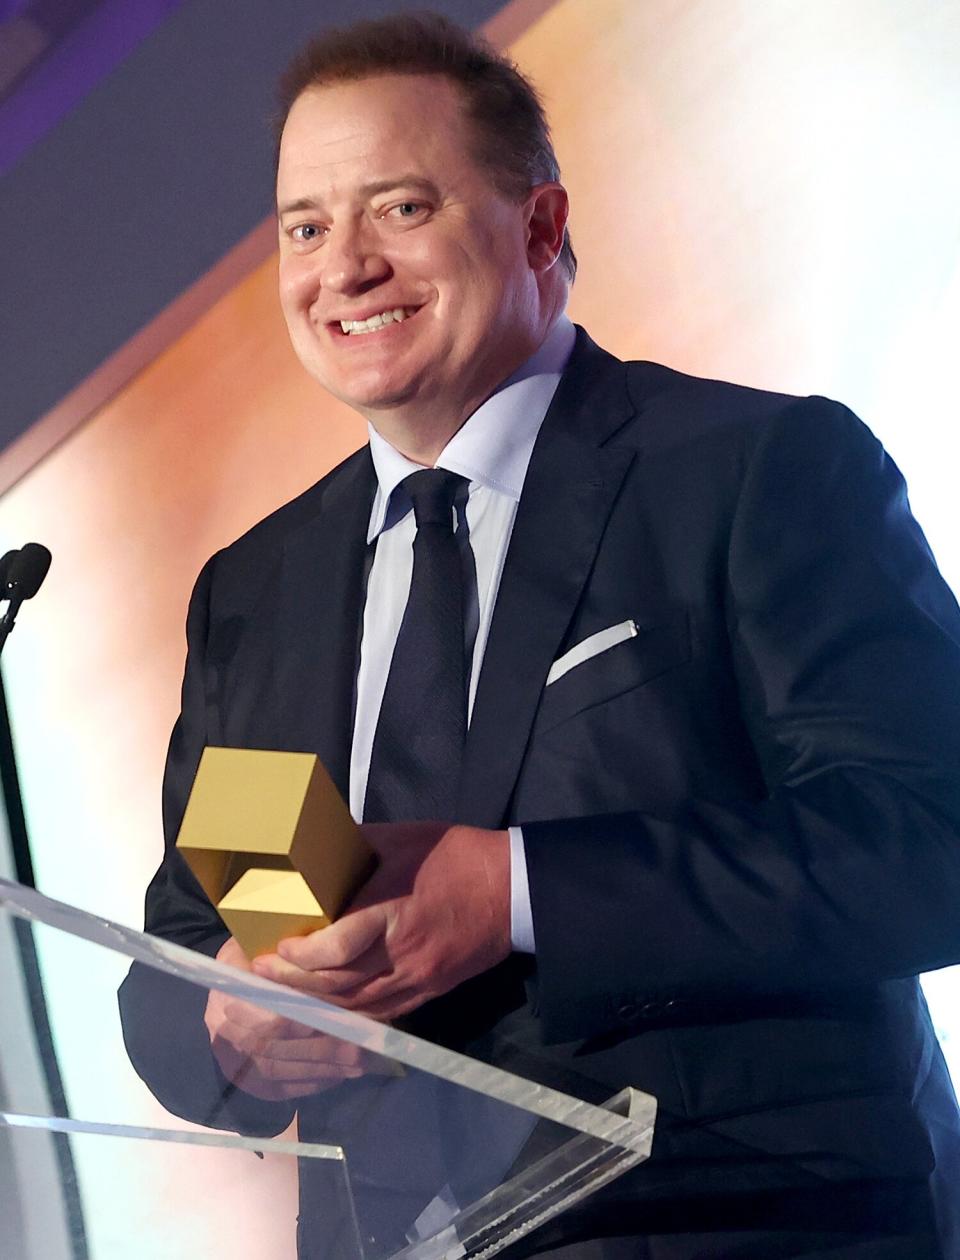 Brendan Fraser accepts the TIFF Tribute Award for Performance presented by IMDbPro for 'The Whale' onstage at the TIFF Tribute Awards Gala